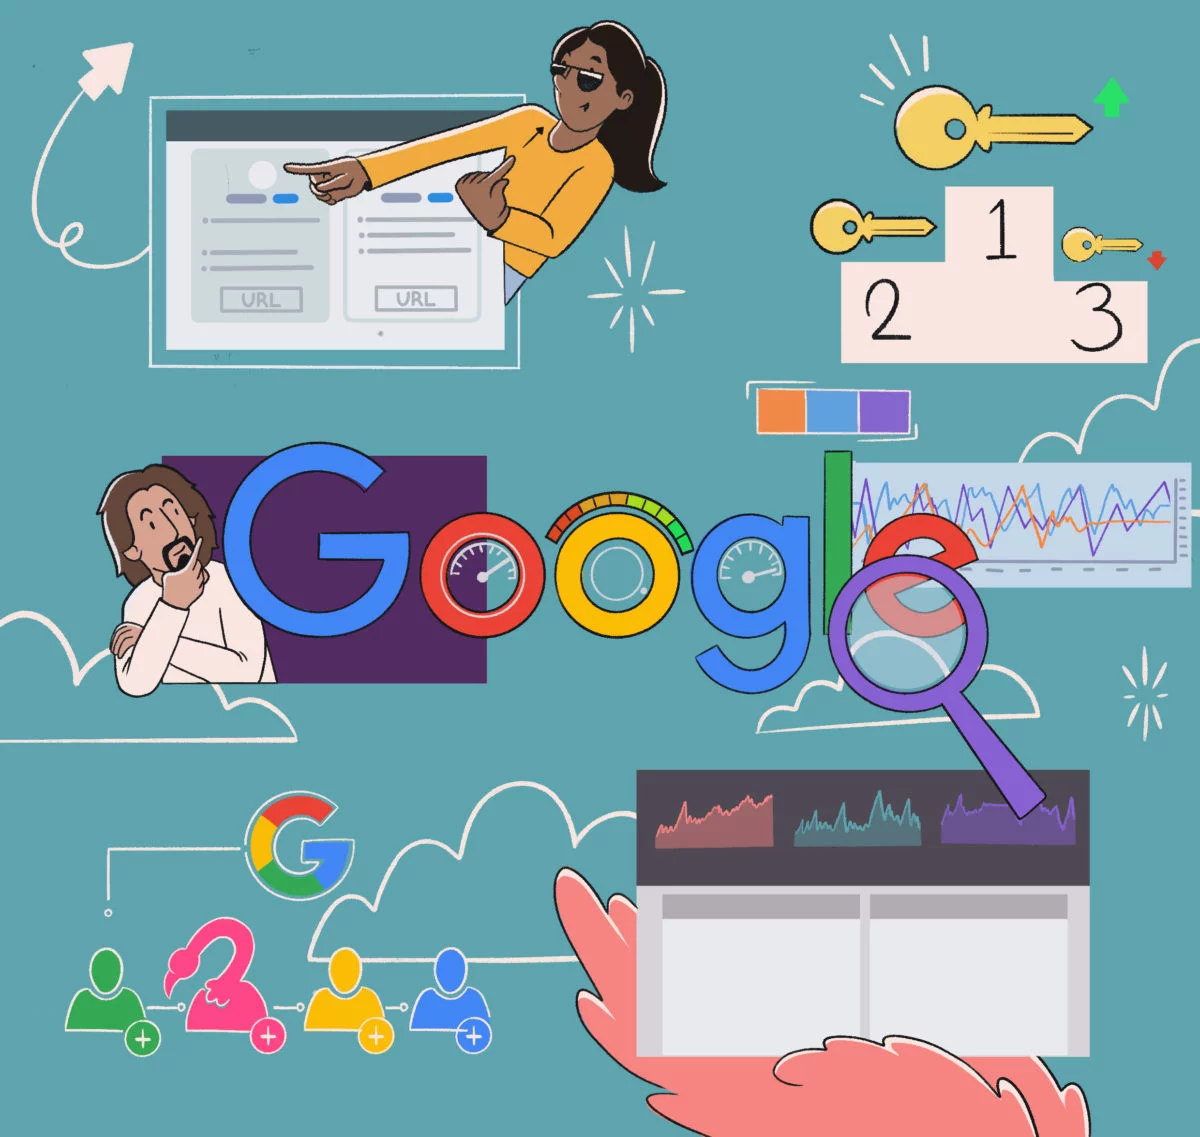 Illustration of diverse concepts related to online search and seo, featuring people interacting with digital elements and google branding.